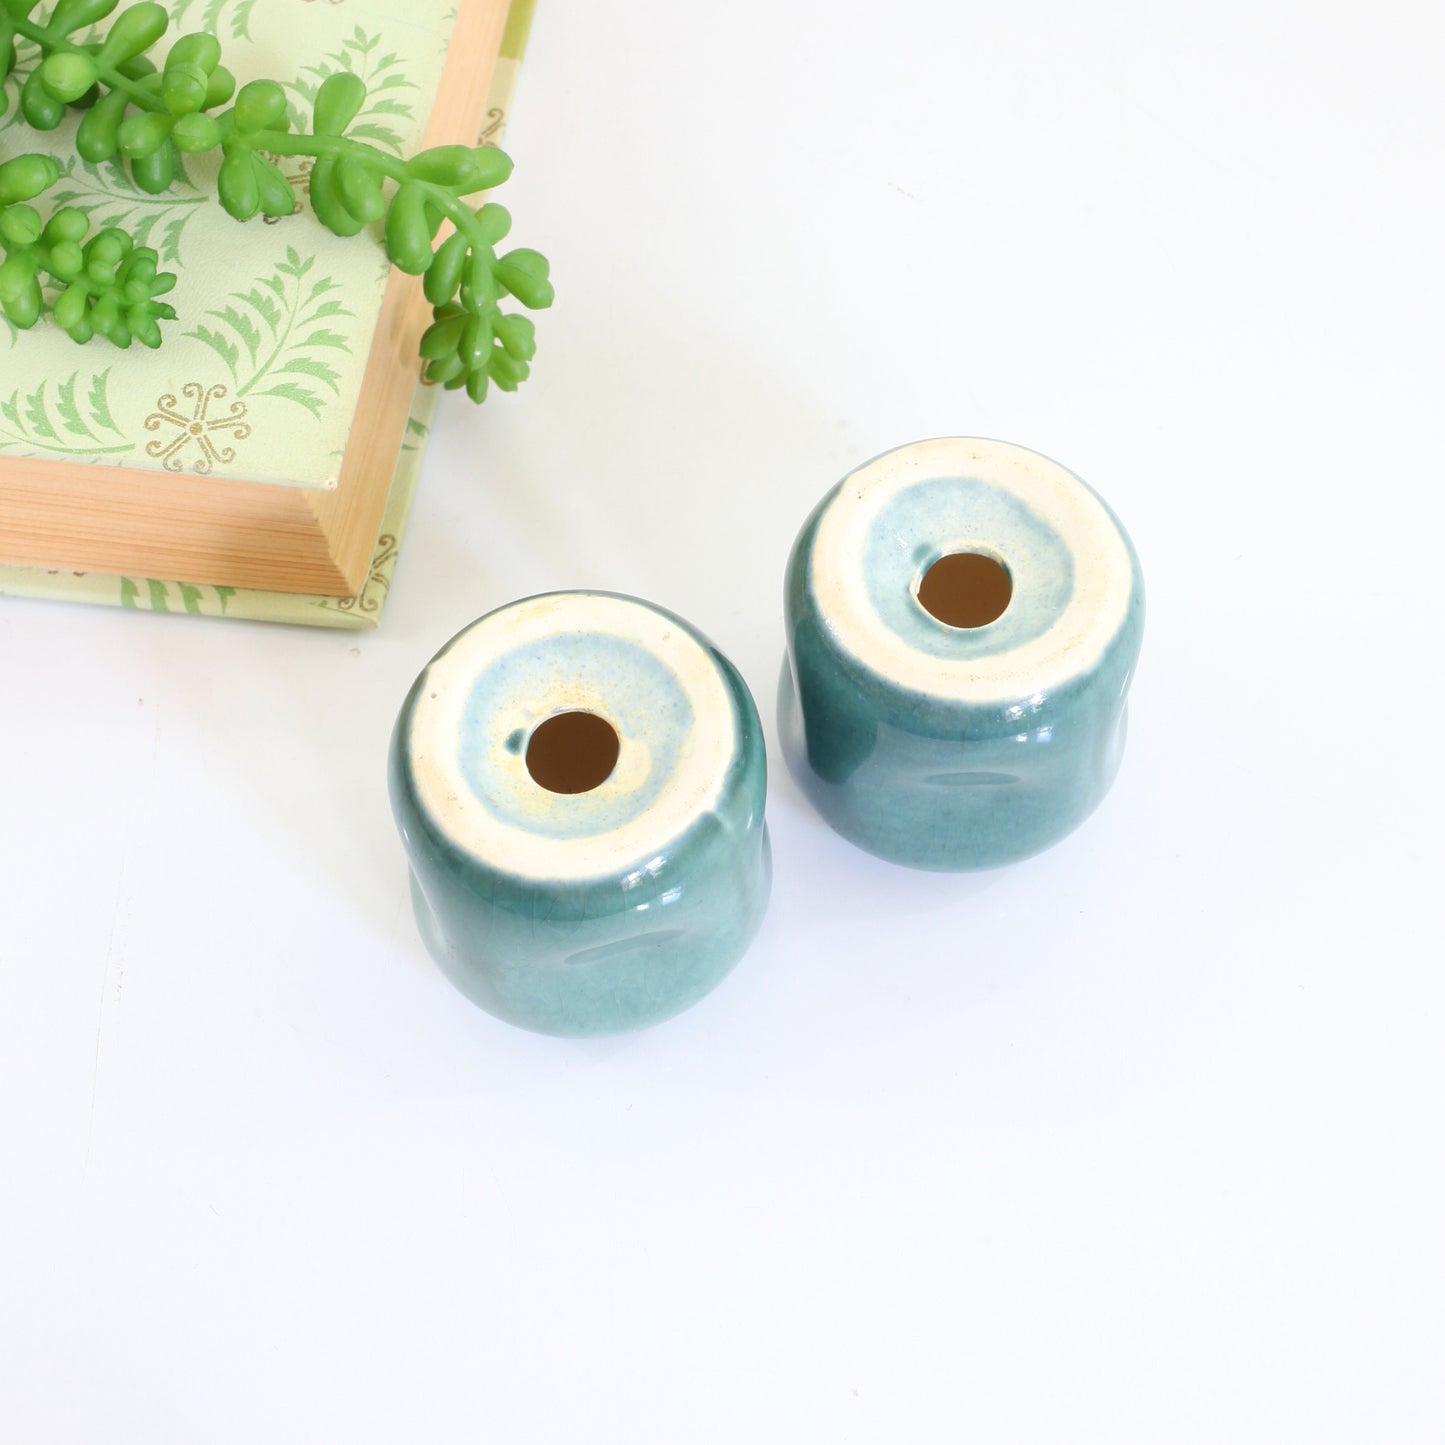 SOLD - Mid Century American Modern Seafoam Salt & Pepper Set by Russel Wright for Steubenville